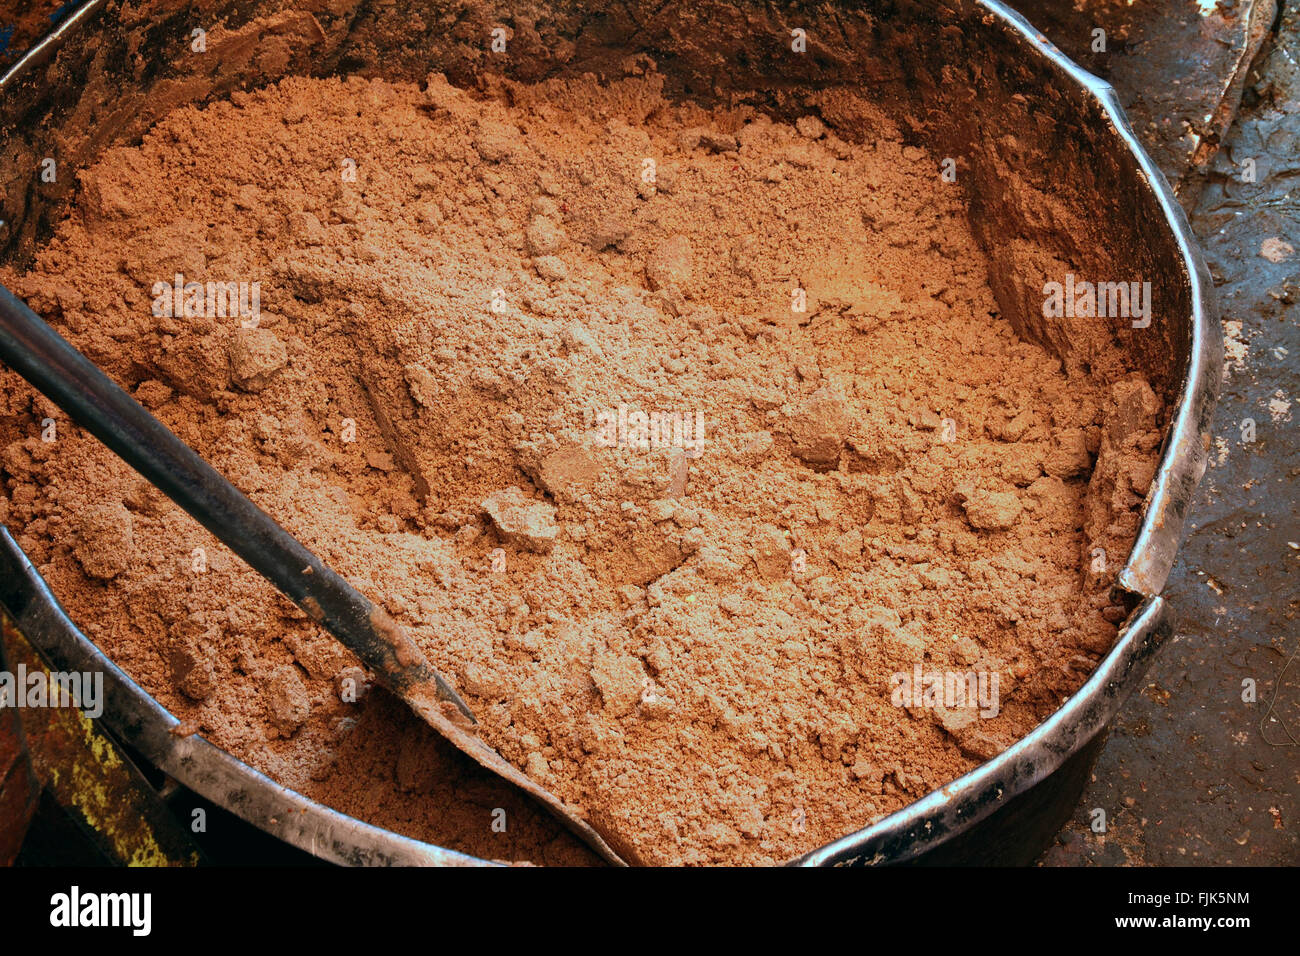 A large metal vat of ground peanuts before adding oil to make peanut butter. Stock Photo